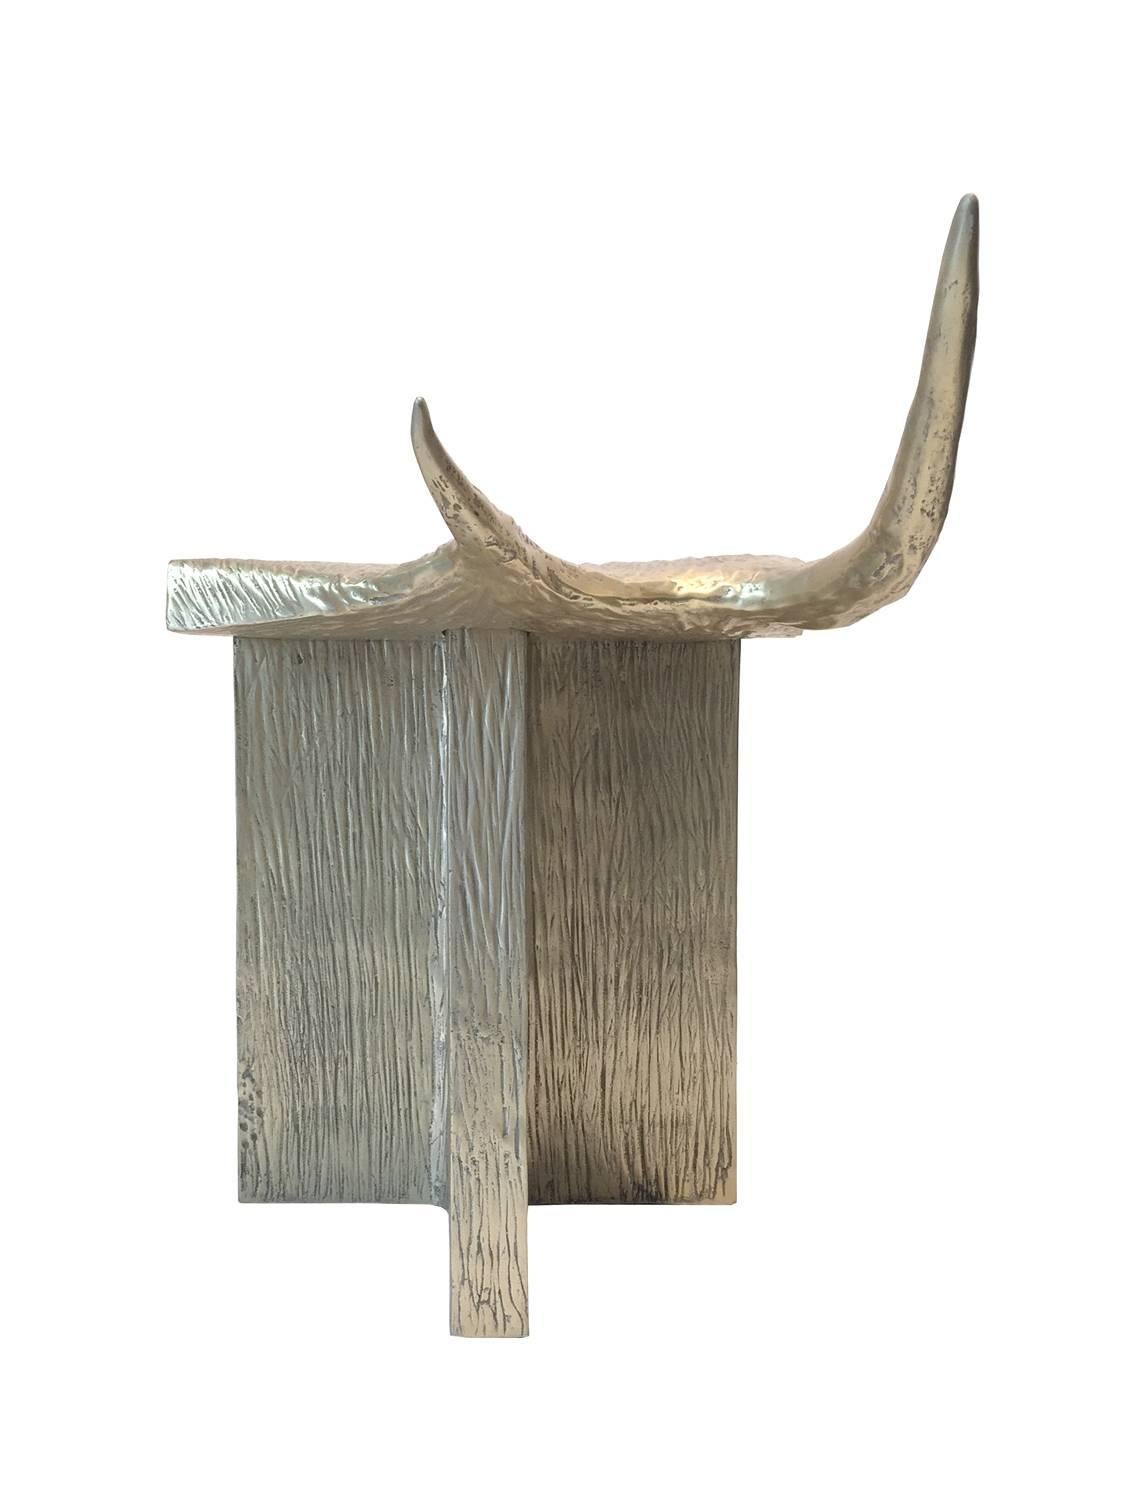 Aluminium Stag T Stool by Rick Owens available from LMD/studio.

An update on the Classic Stag T stool from Rick Owens Home collection, the aluminium Stag T stool features a simple 'T' shaped stool design with two protruding antler forms and a